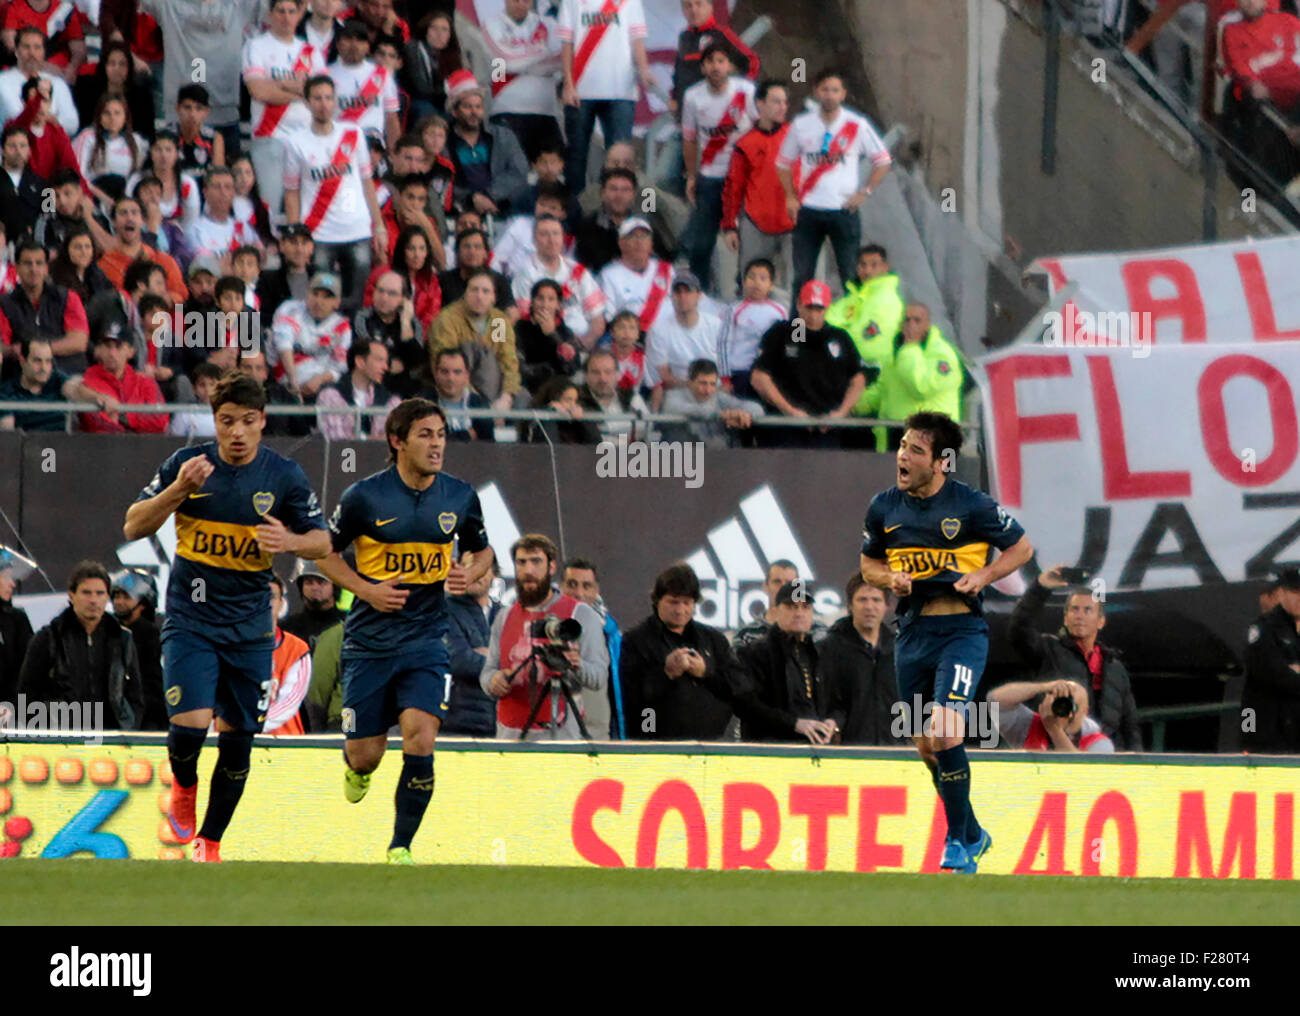 Buenos Aires, Argentina. 13th Sep, 2015. RIVER PLATE X BOCA JUNIORS - Nicolás Lodeiro of Boca Juniors celebrates his goal during the derby with River Plate for the 24th round of Argentinian Soccer Championship in  Monumental Stadium. Credit:  Néstor J. Beremblum/Alamy Live News Stock Photo